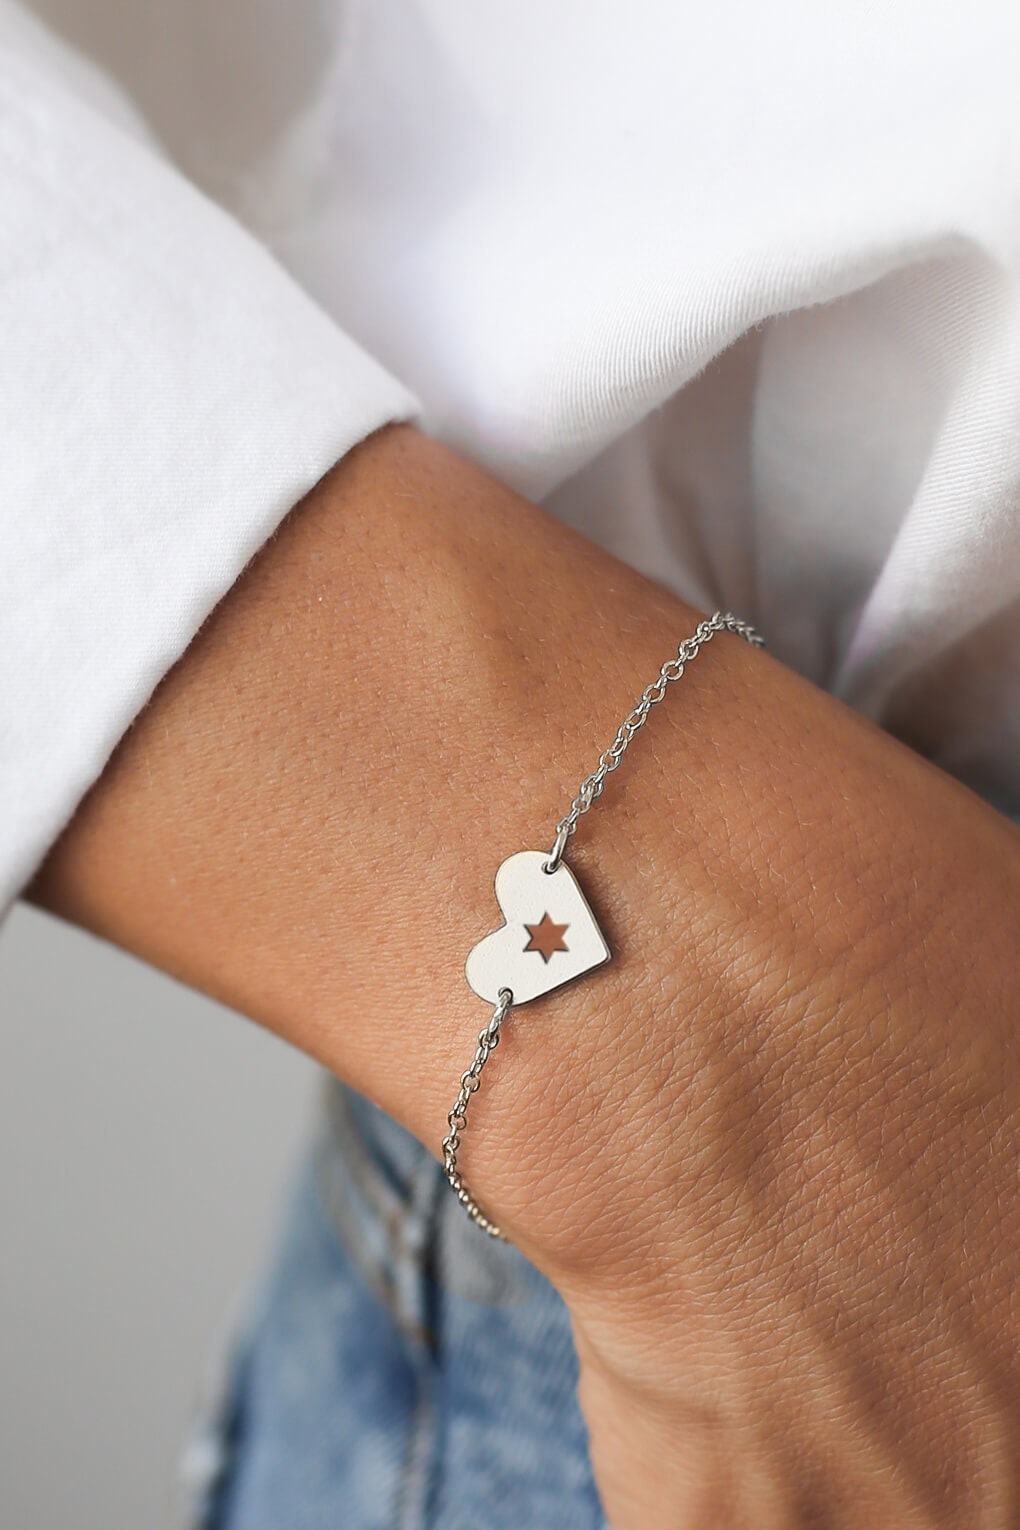 Star Charm Israel of Etsy Heart Jewelry, at Bracelet, Heart - Bracelet, Israel Jewelry, David Support Shape Stackable